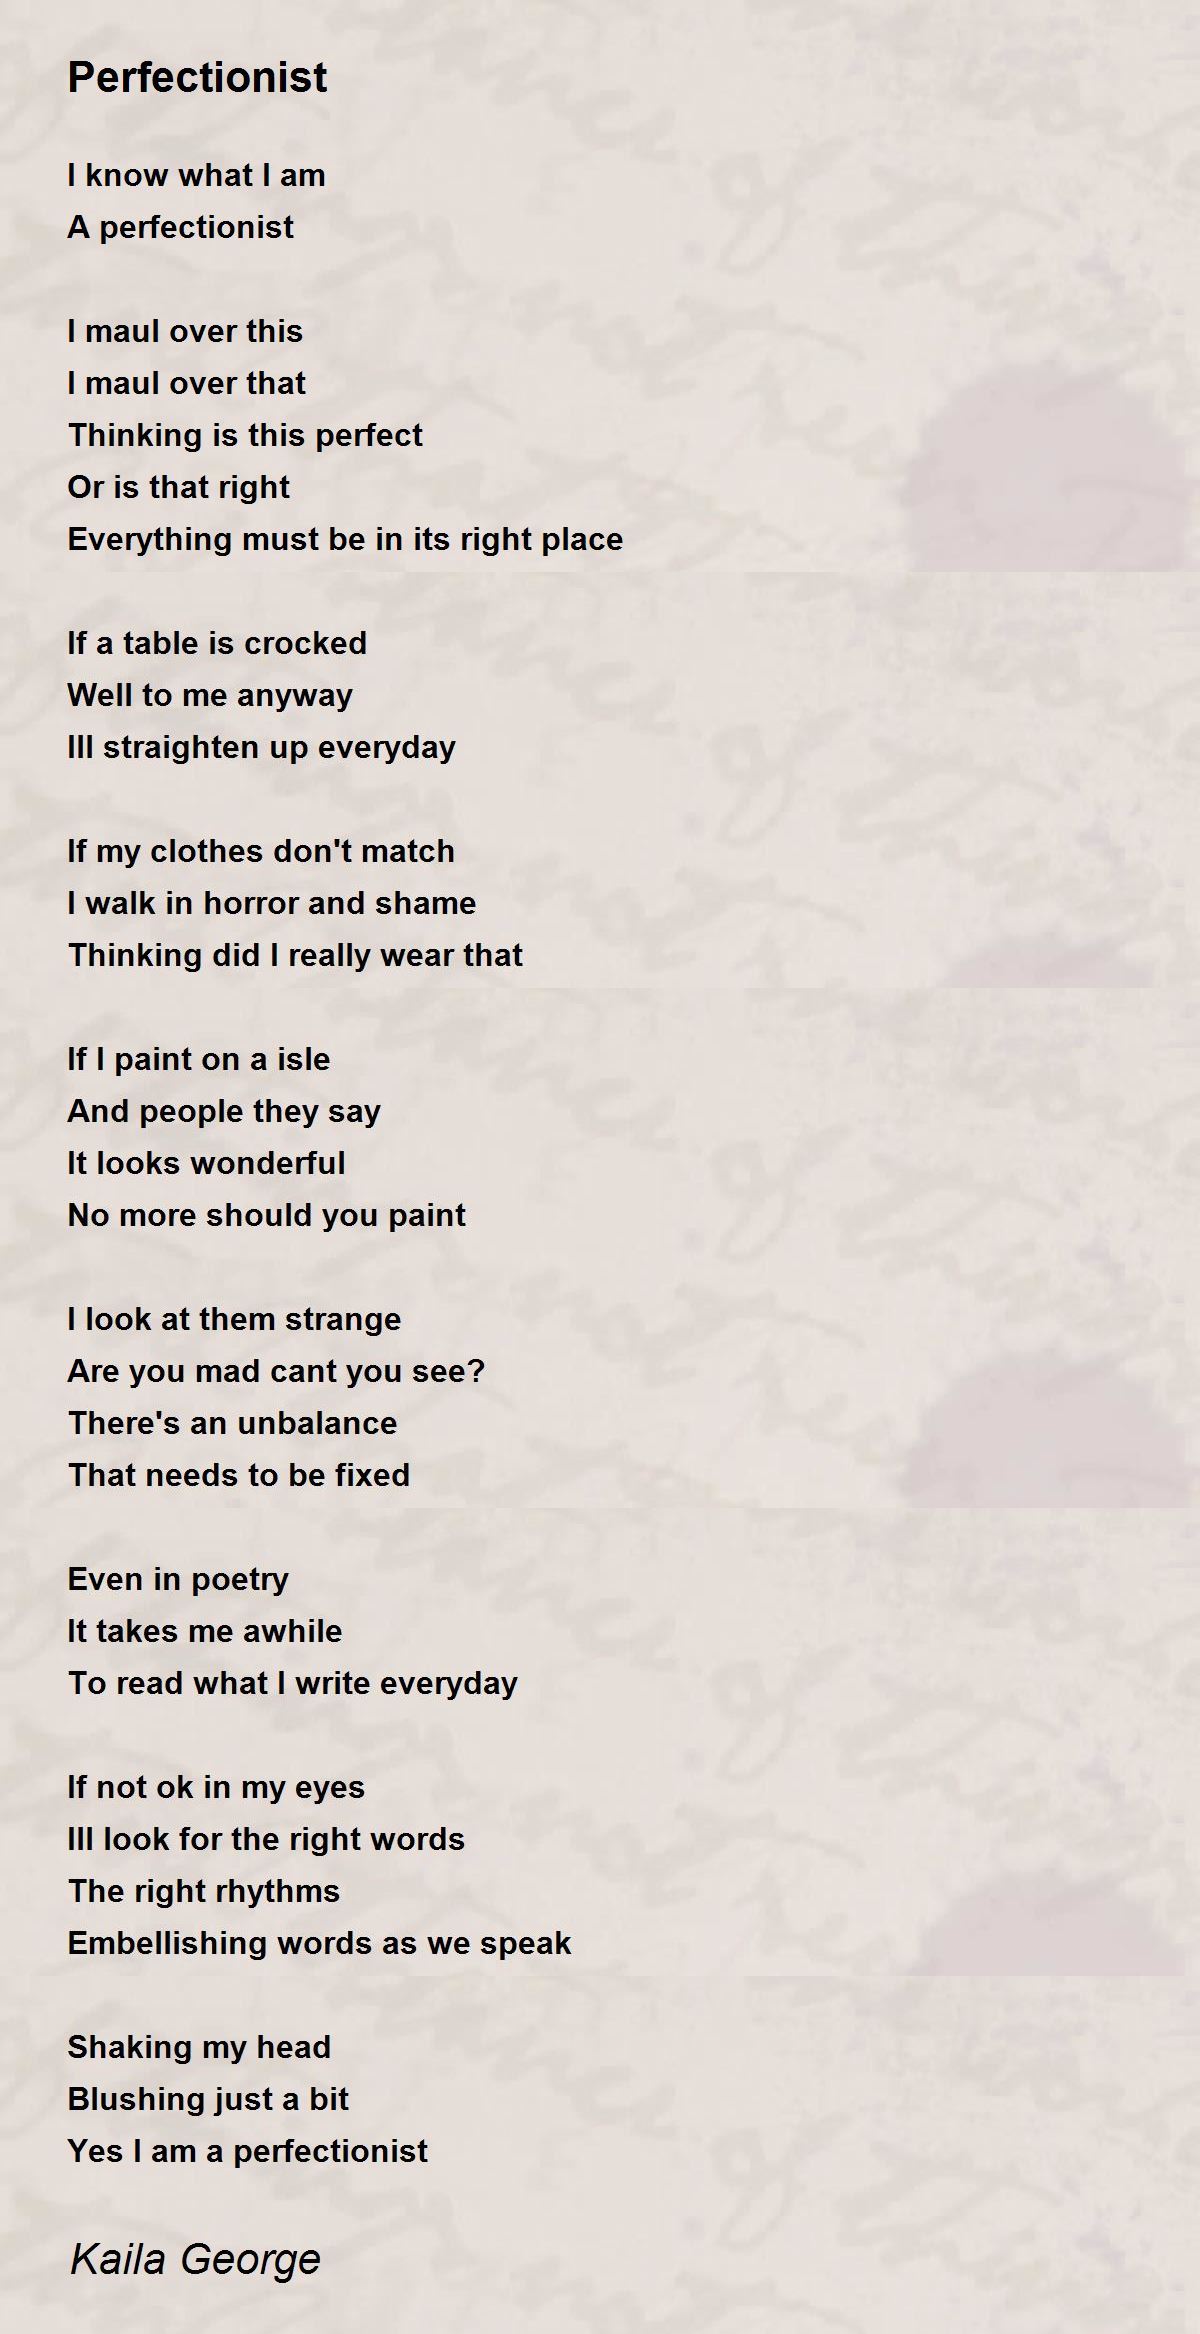 Perfectionist - Perfectionist Poem by Kaila George